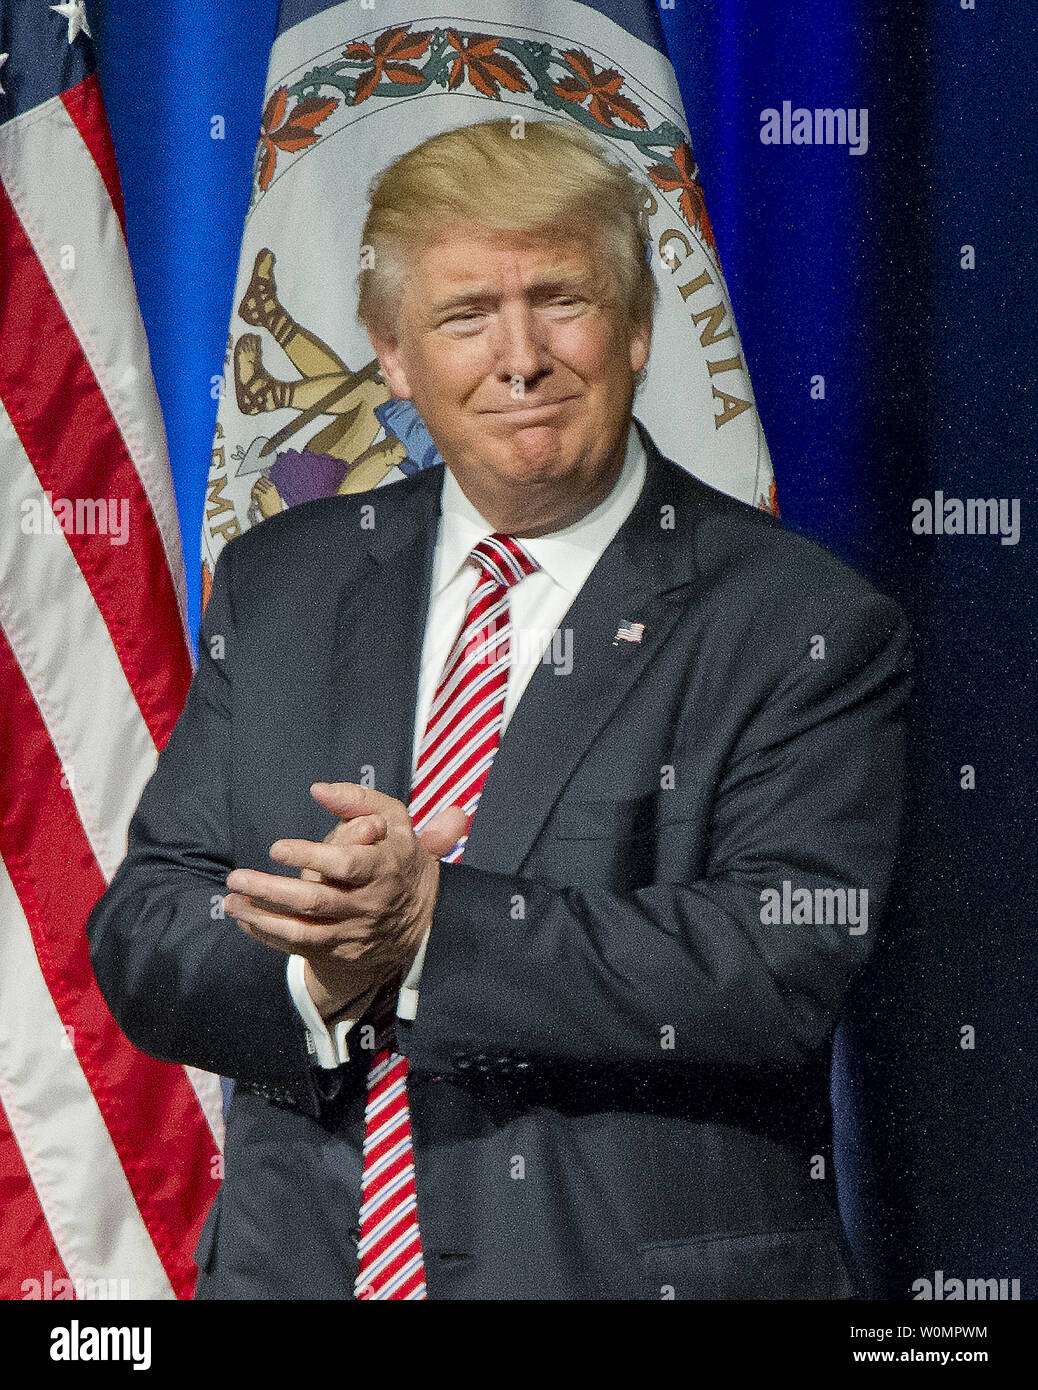 Donald J. Trump, the Republican candidate for President of the United States, makes a campaign appearance at Briar Woods High School in Ashburn, Virginia on Tuesday, August 2, 2016.   Photo by Ron Sachs/UPI Stock Photo